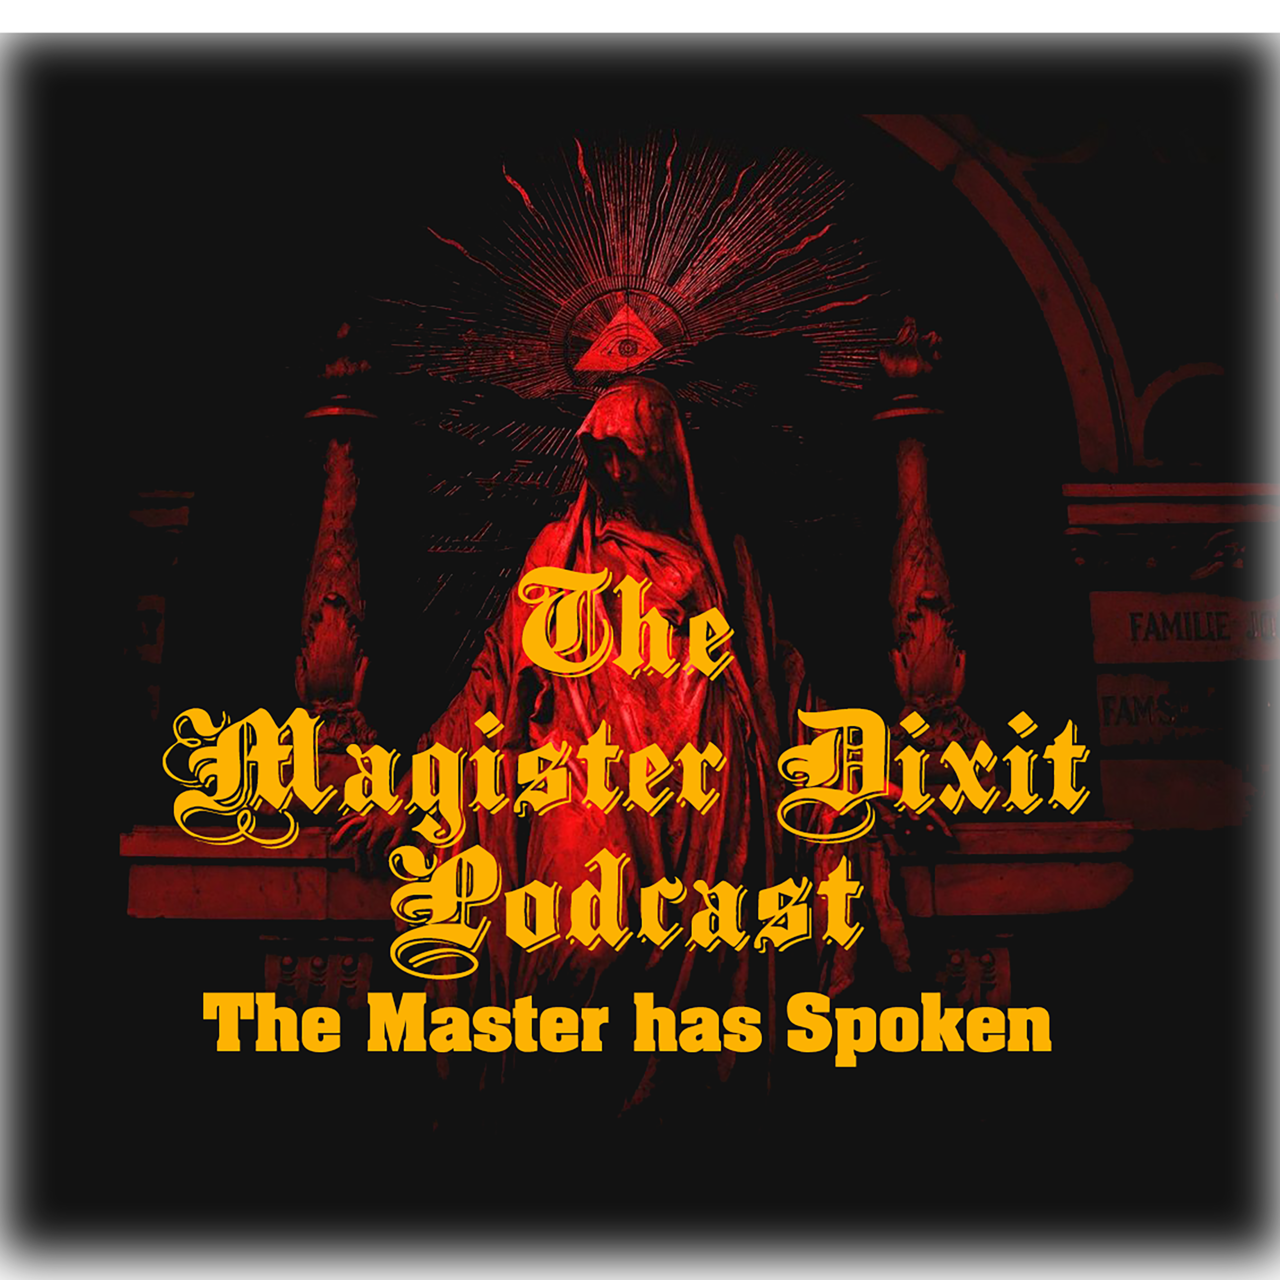 The Magister Dixit Podcast on Substack